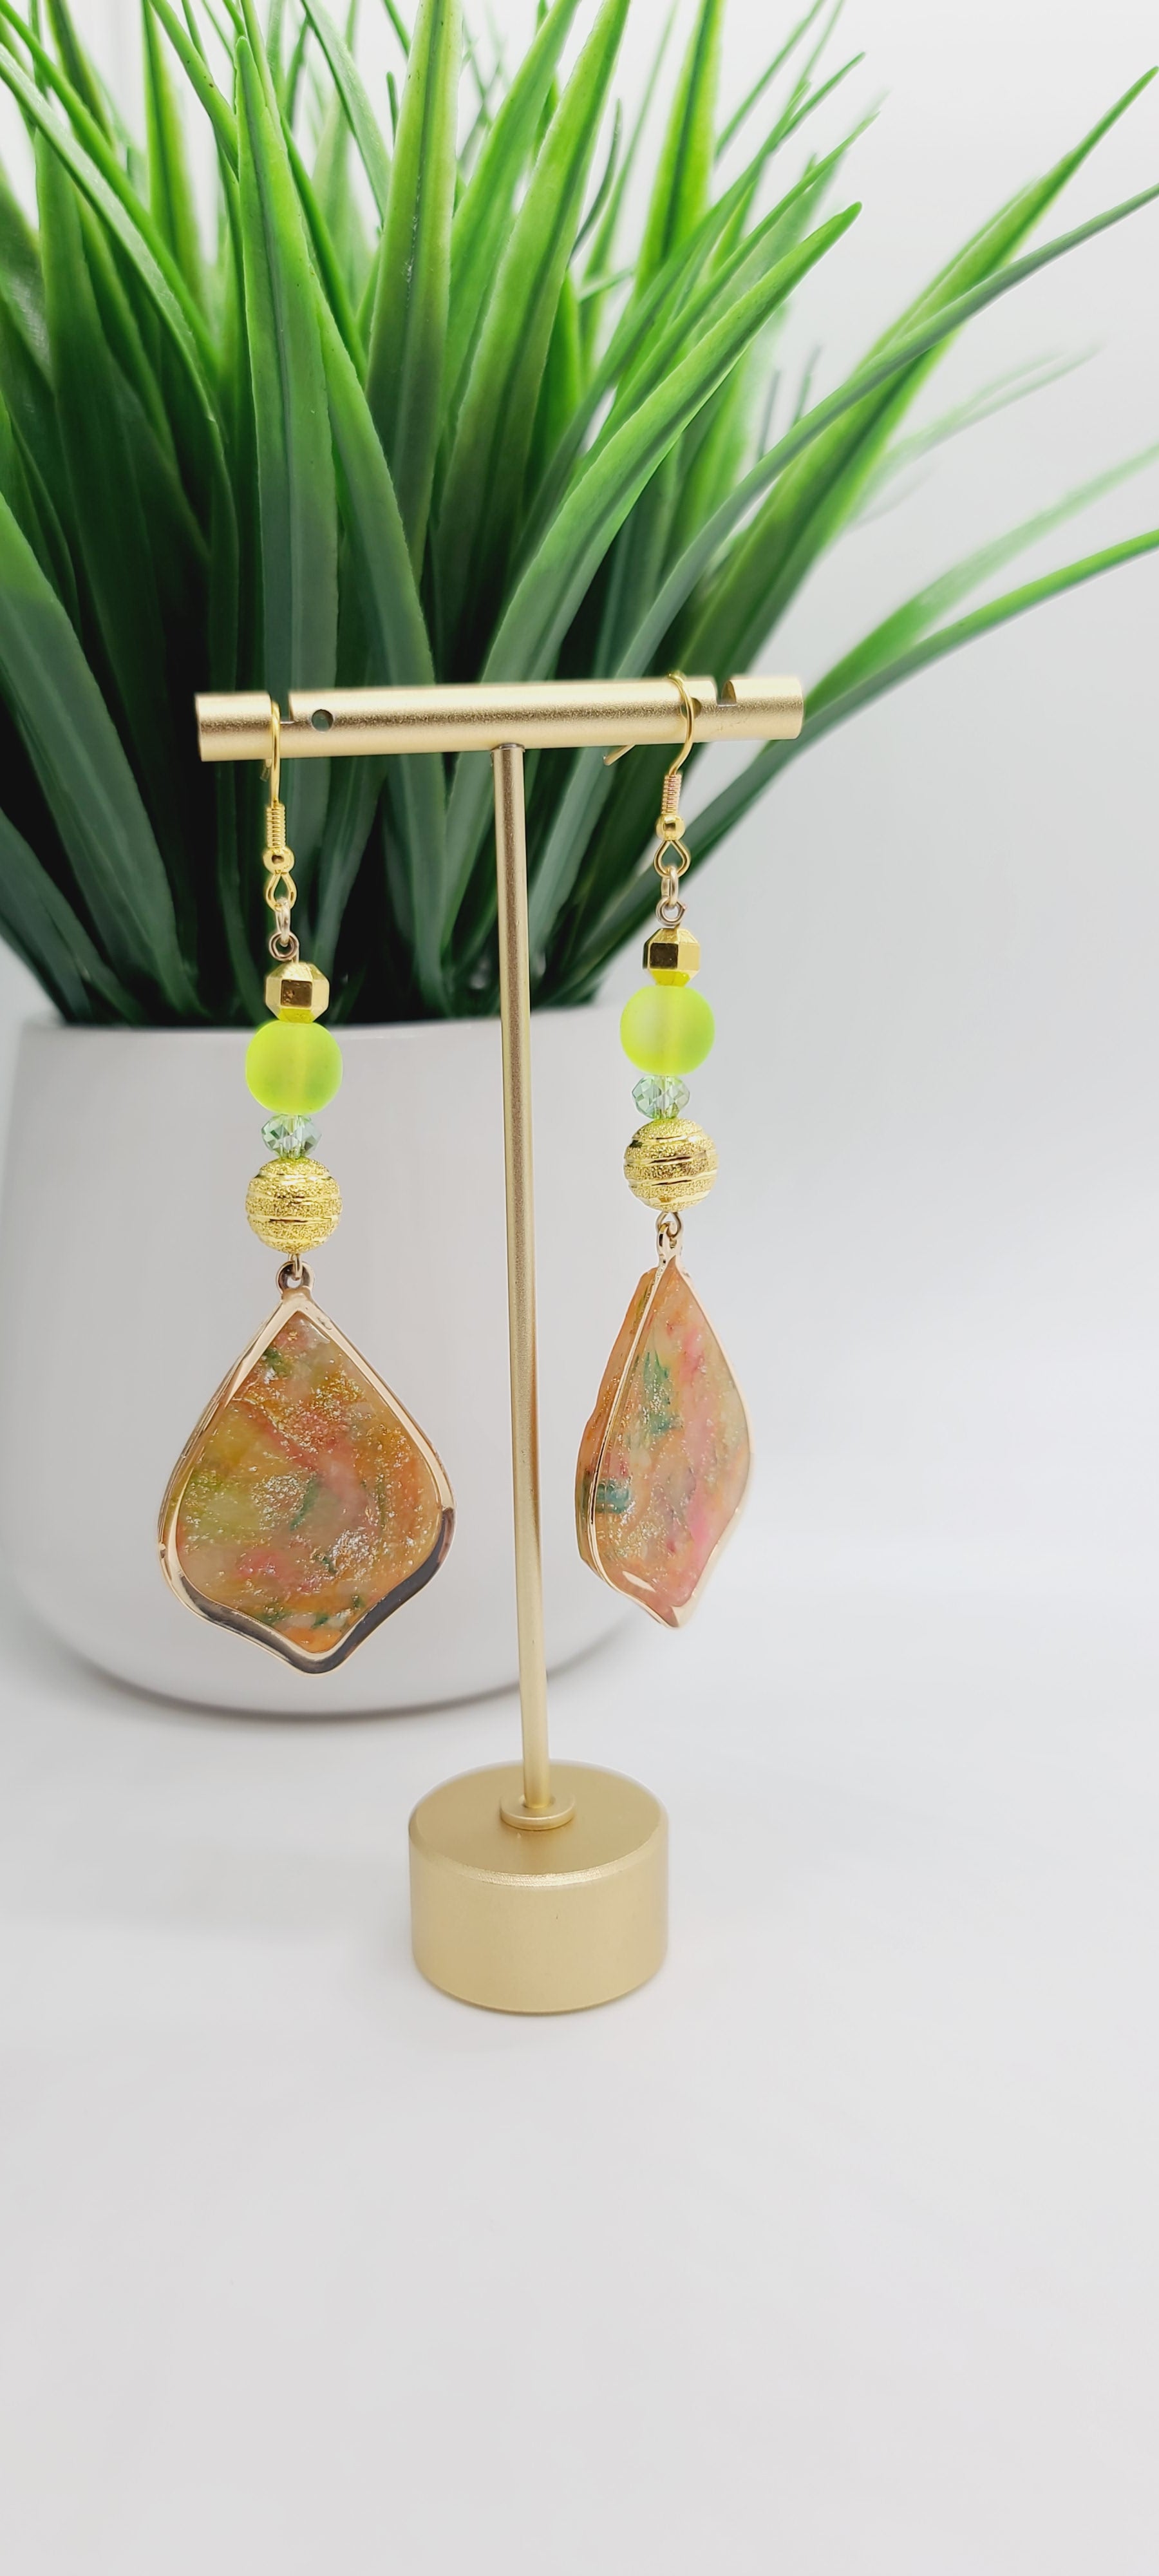 Length: 3.75 inches | Weight: 0.7 ounces  Distinctly You! These earrings are made with gold teardrop frame with inlaid polymer clay in orange green gold with gold flakes,10mm gold sparkle striped metal beads, 10mm frosted lime green glass beads, 4mm iridescent faceted glass beads, and 6mm gold faceted beads.